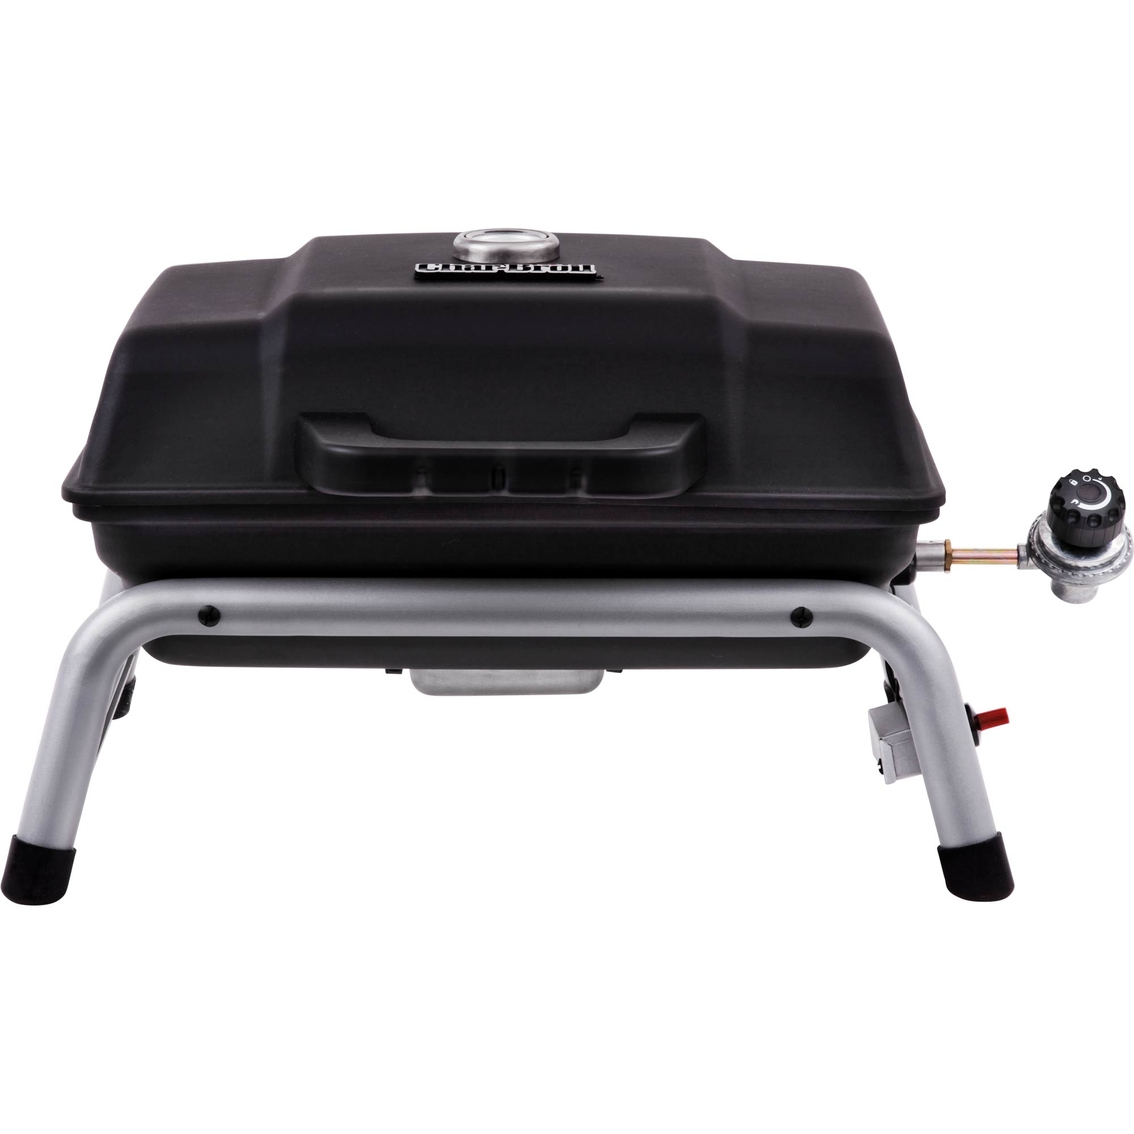 Char-Broil Portable 240 Grill - Image 2 of 5